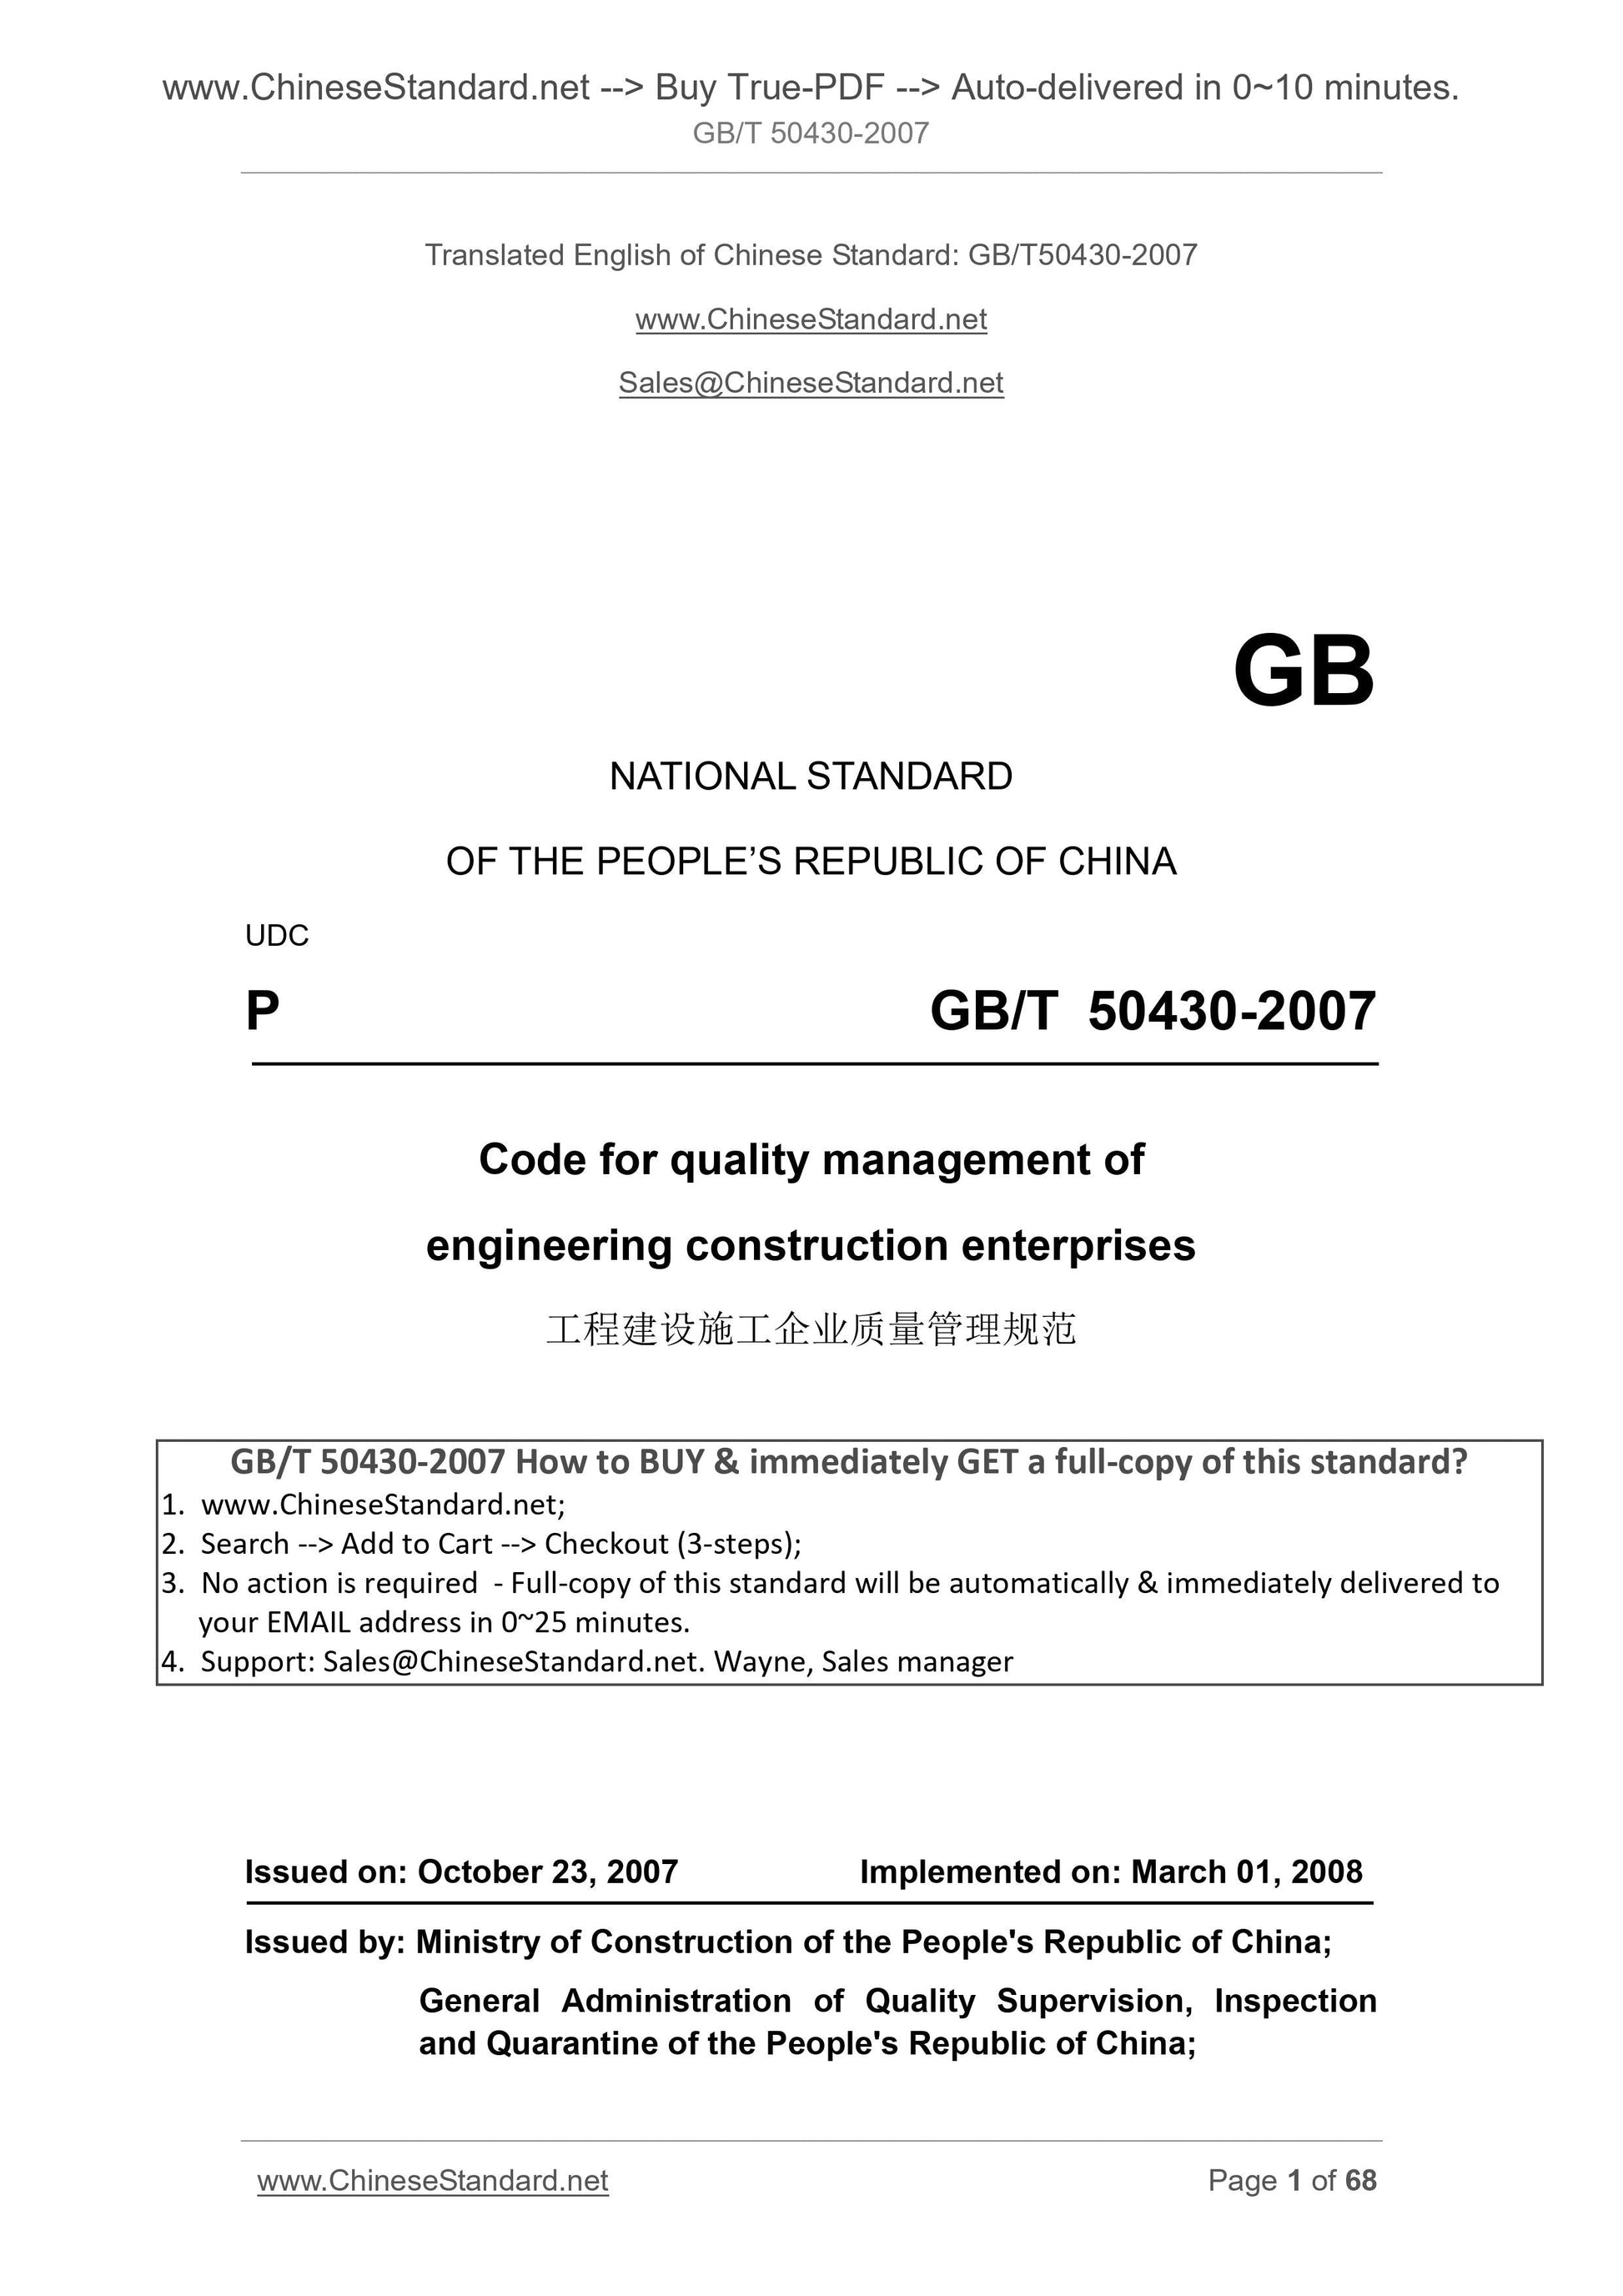 GB/T 50430-2007 Page 1